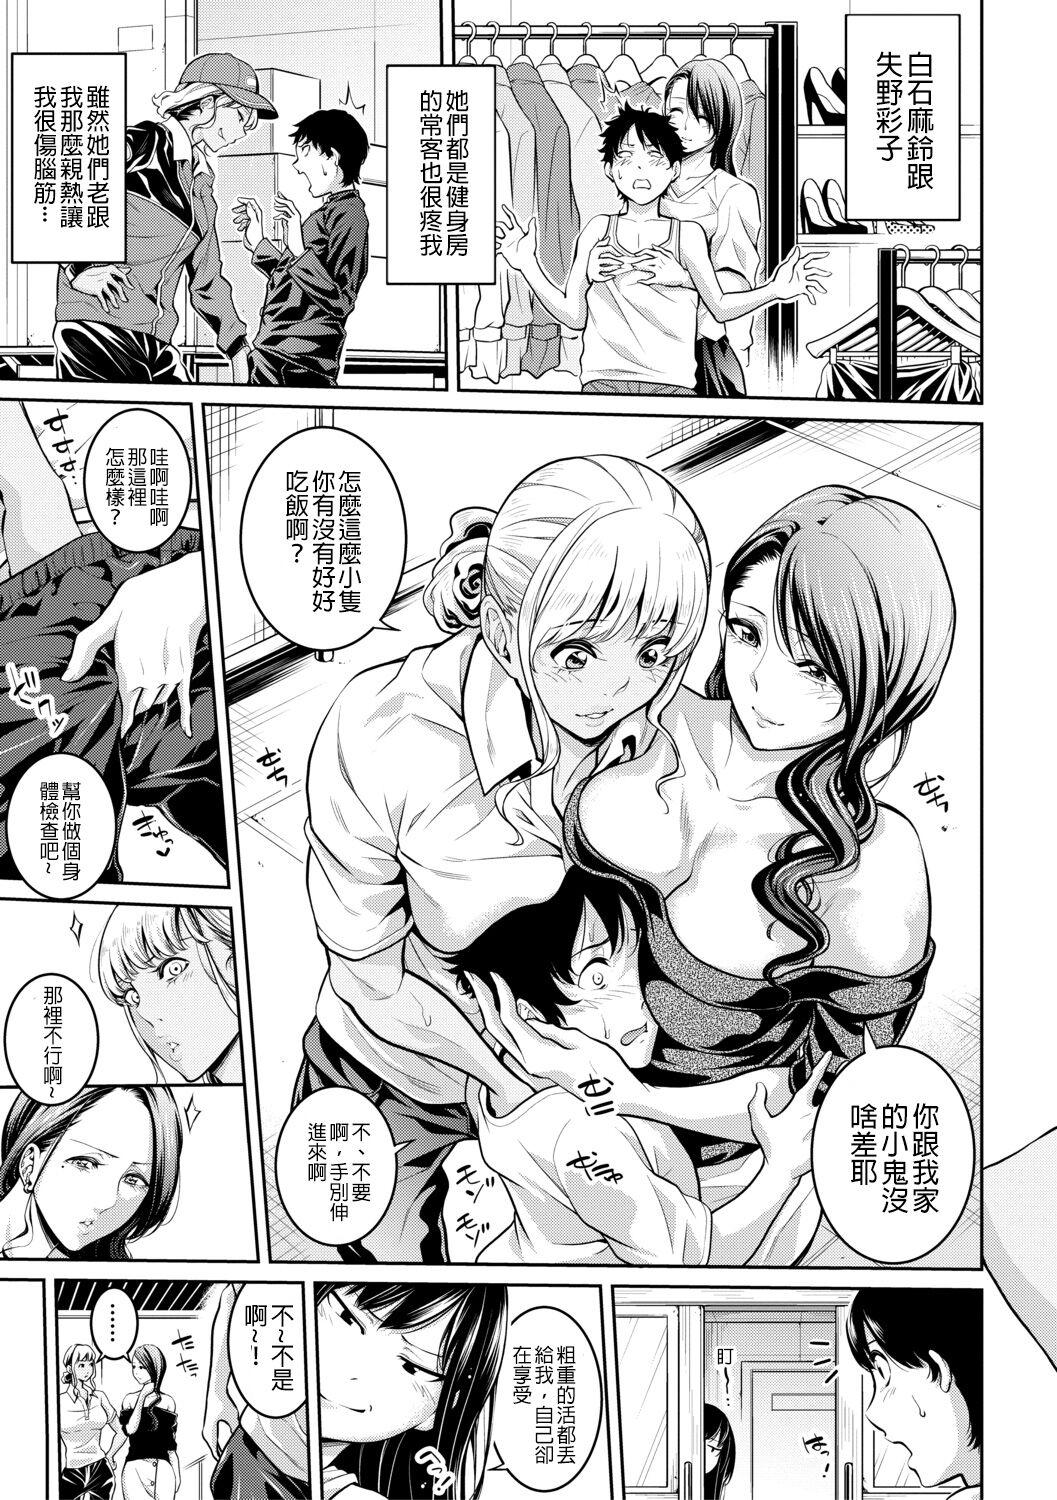 Solo [Brother Pierrot] Onee-san to Ase Mamire Ch. 1-5 [Chinese] [Digital] Women Sucking Dick - Page 8